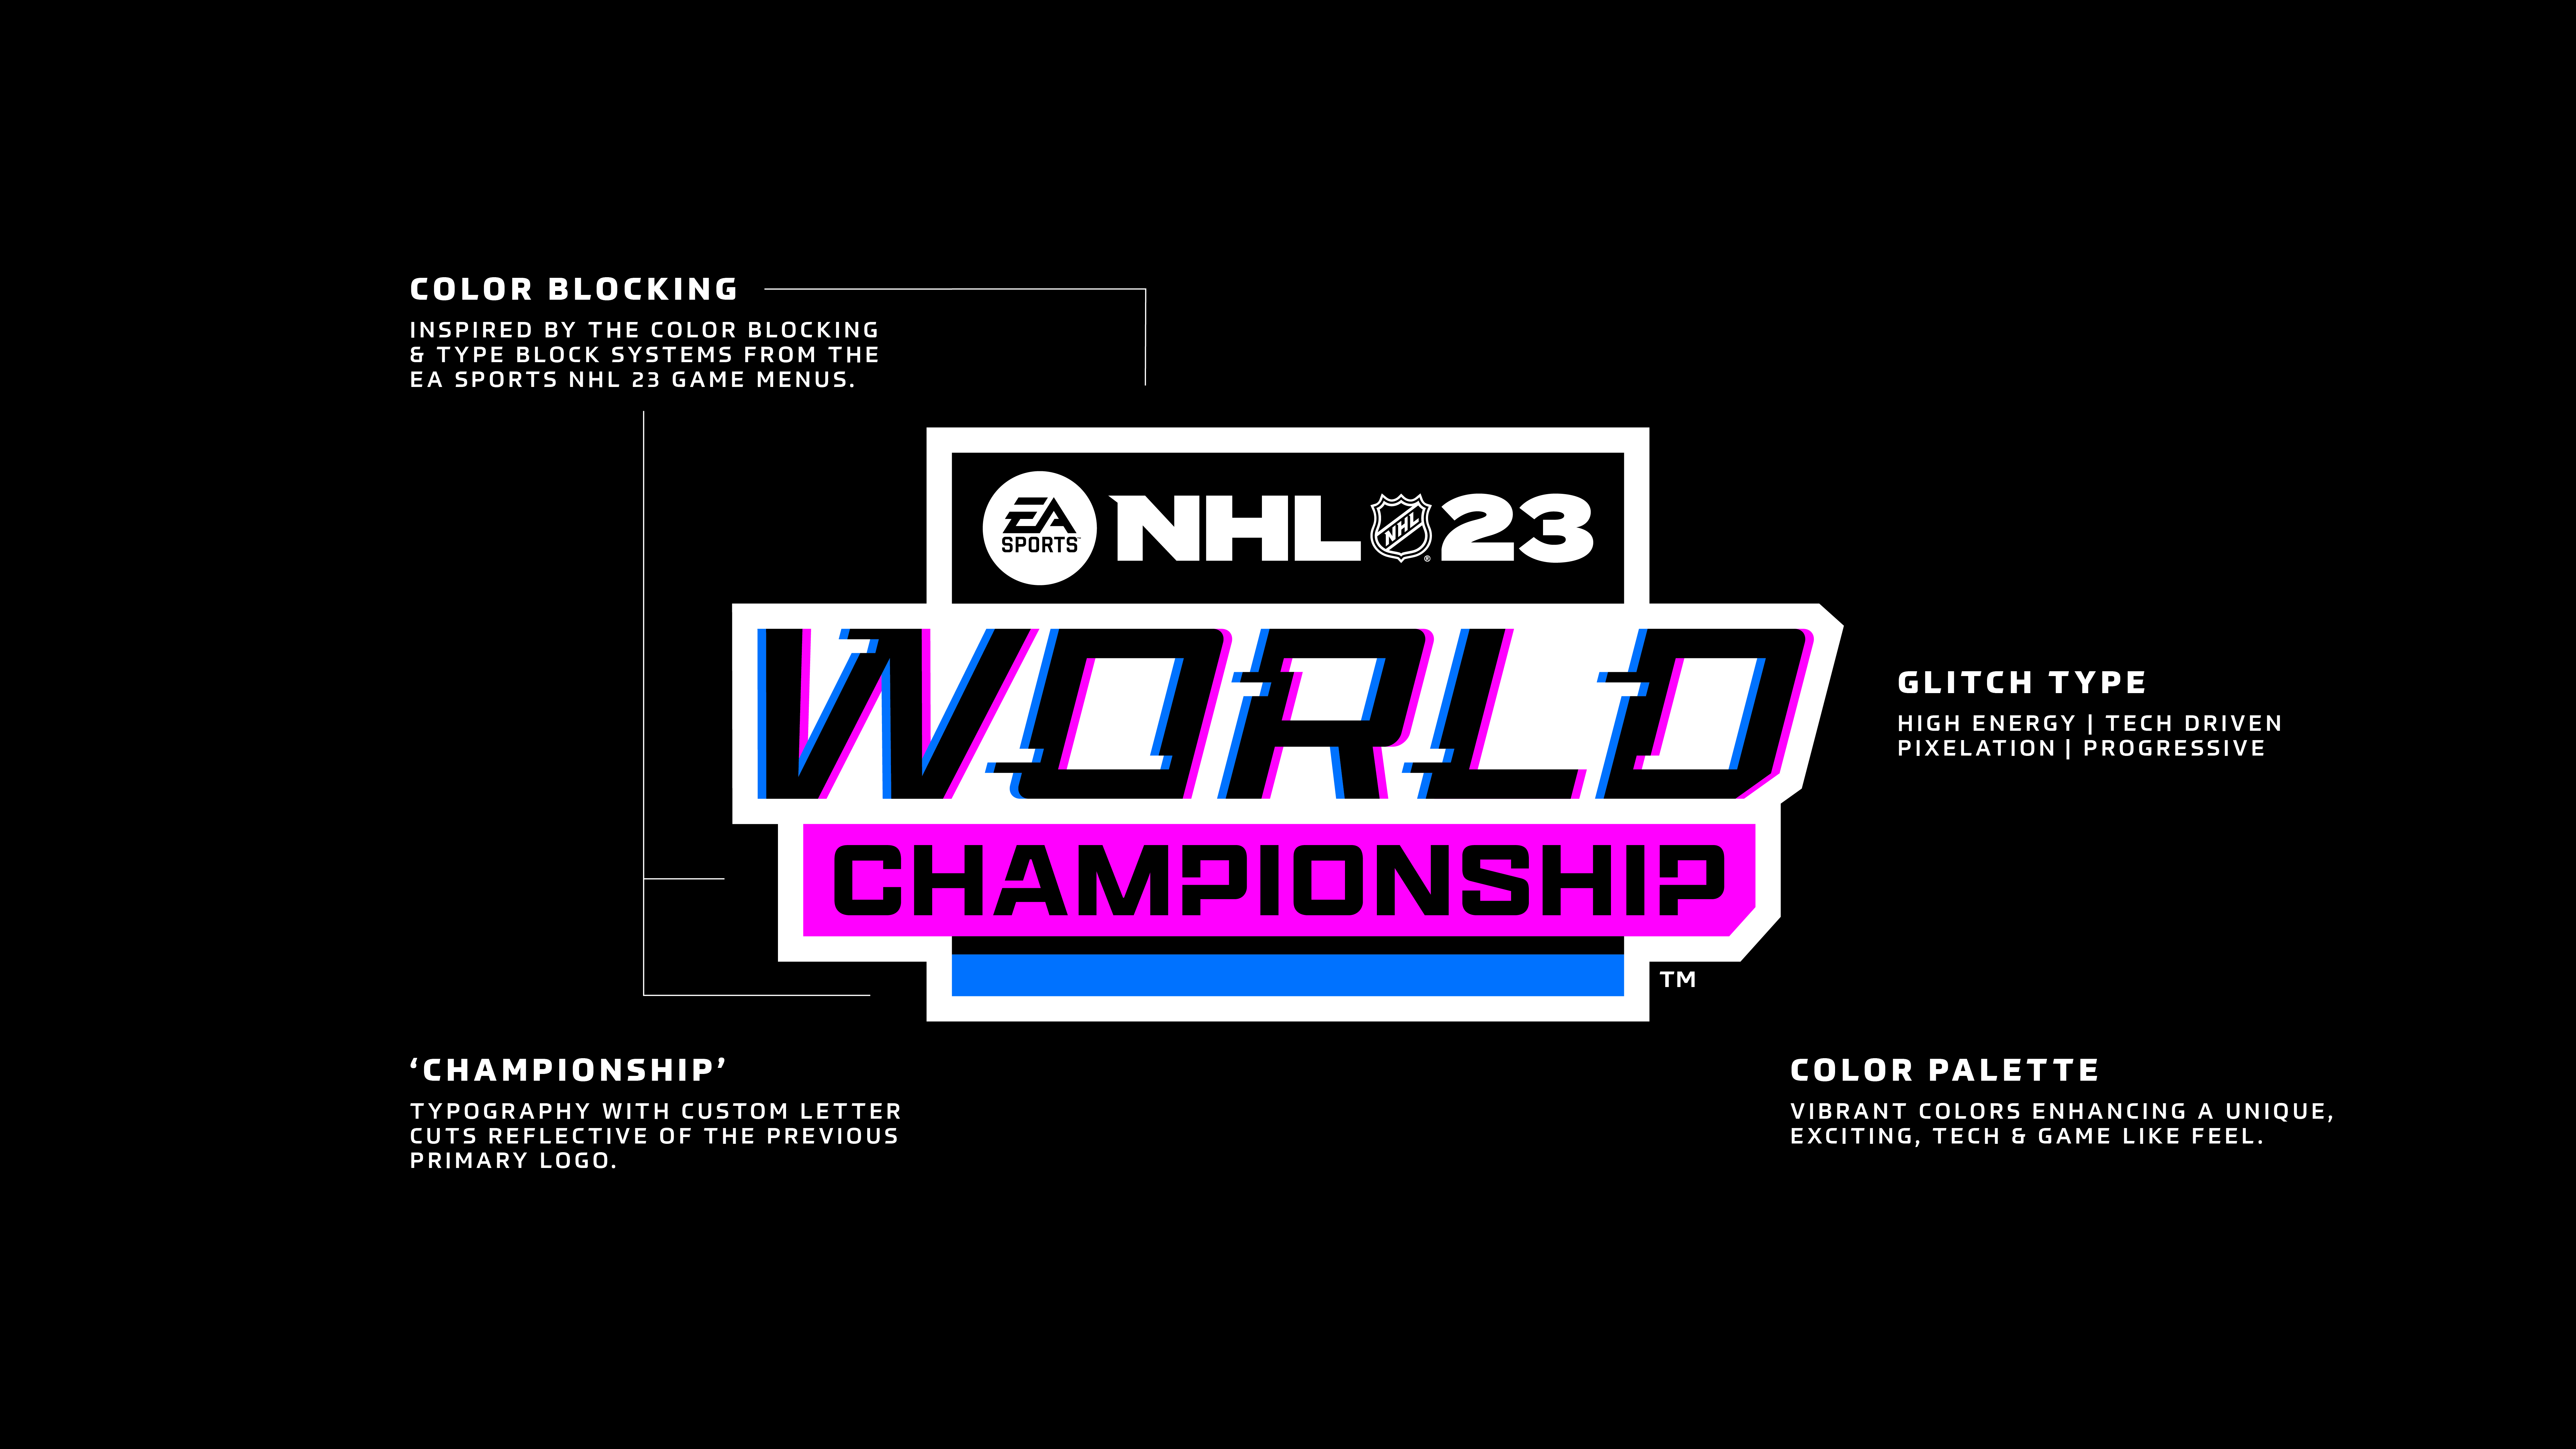 NHL.com Media Site News Esports Championship NHL Events Annual Announces New of for - - and Brand Expanded Calendar Identity